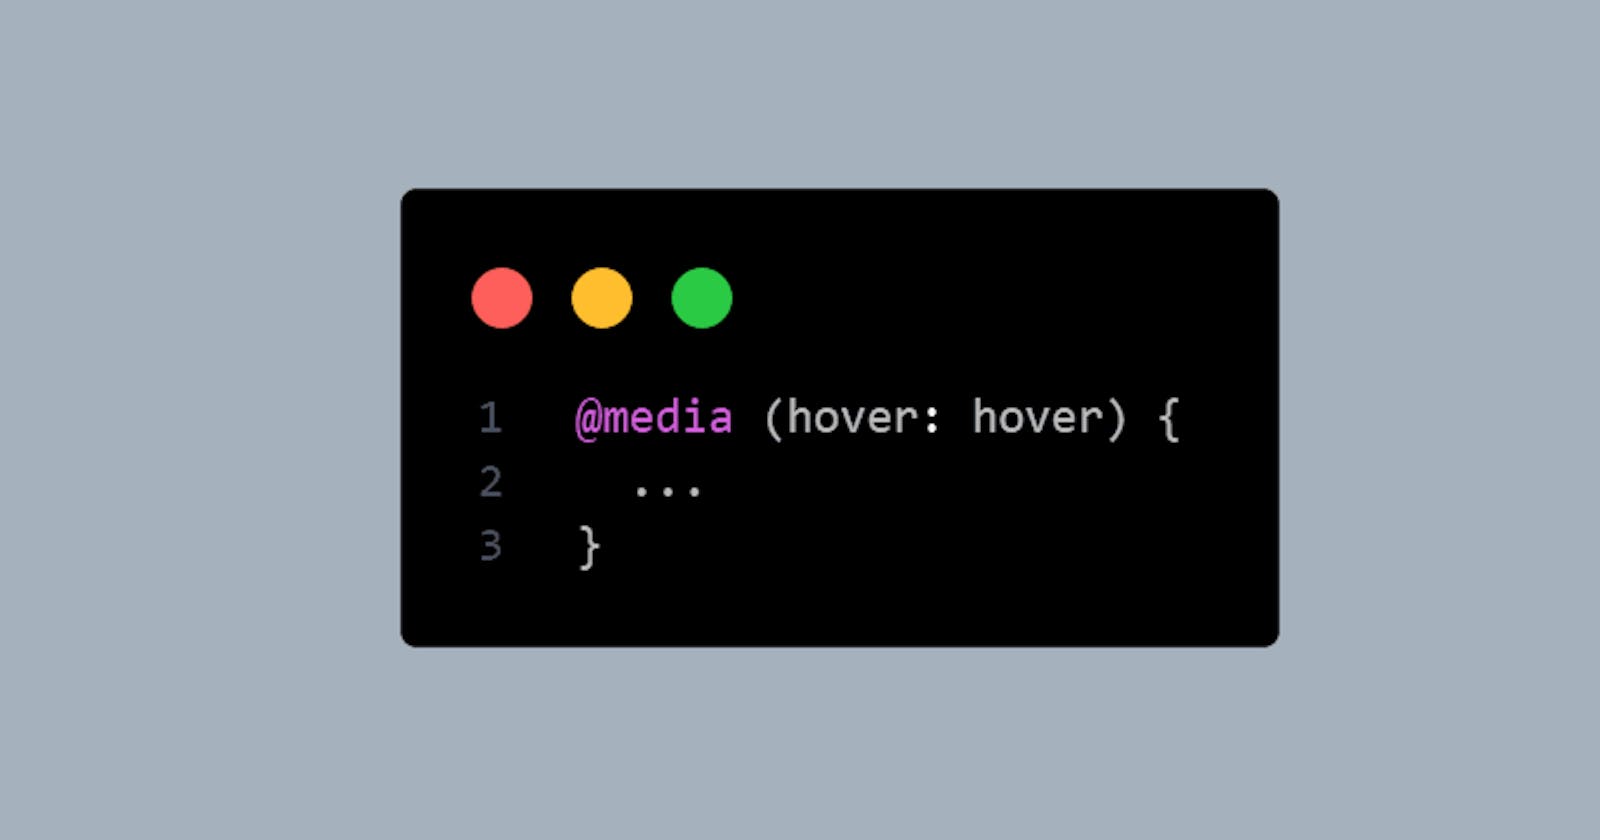 @media (hover: hover) - CSS Media Query